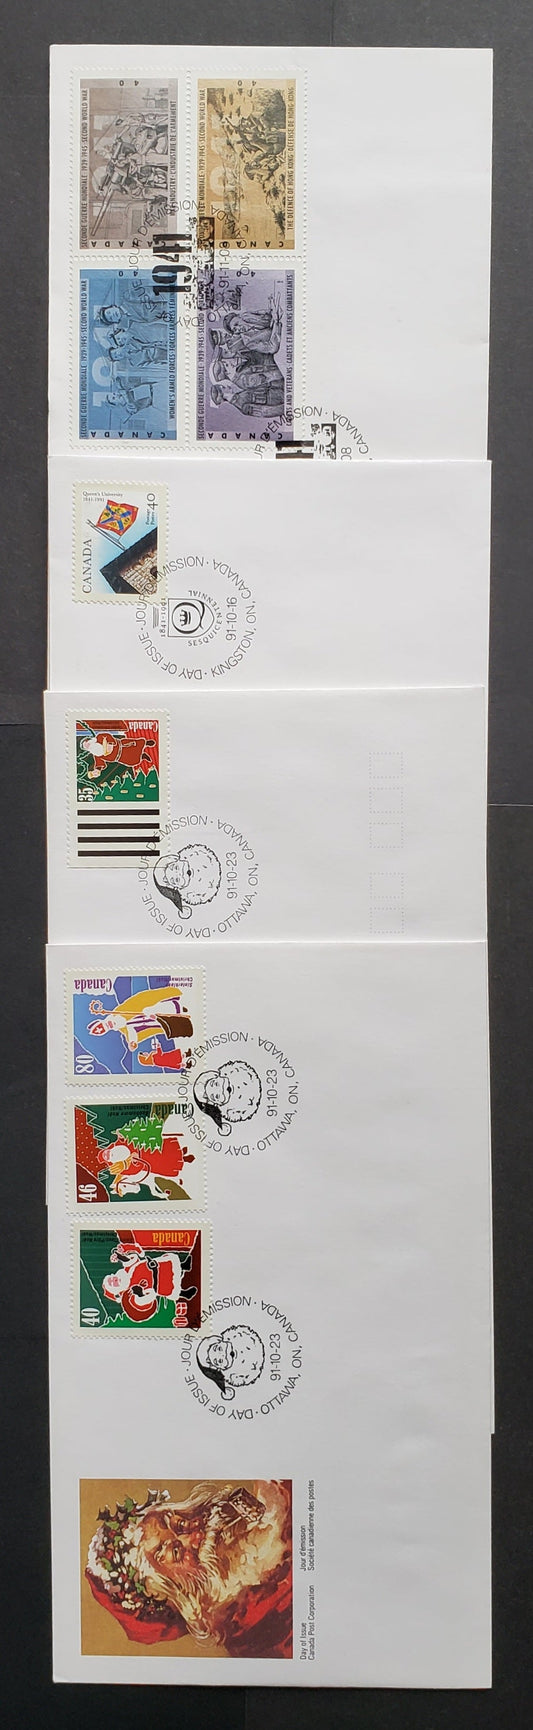 Canada #1338-1342, 1348a 35c-80c Multicolor 1991 Queens University - WW2 Issues, 4 Canada Post FDC's Franked With Singles & Block, Approx 40,000 Of Each Produced, Cat. Value $10.3